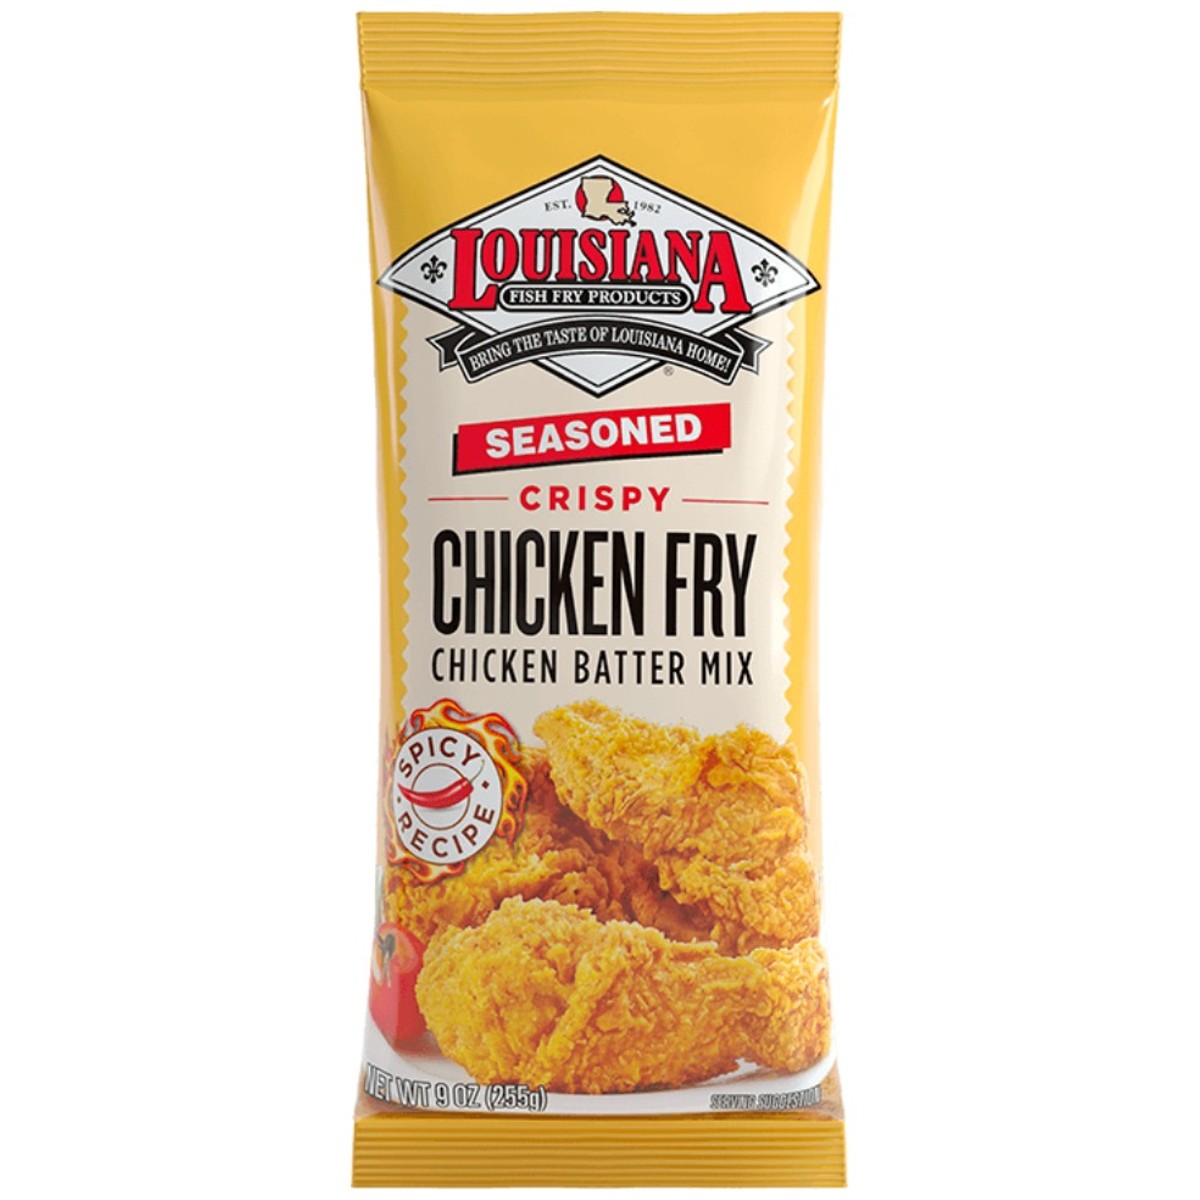 Buy Louisiana Supreme Chicken Wing Sauce 17 oz (3-pack) Online at